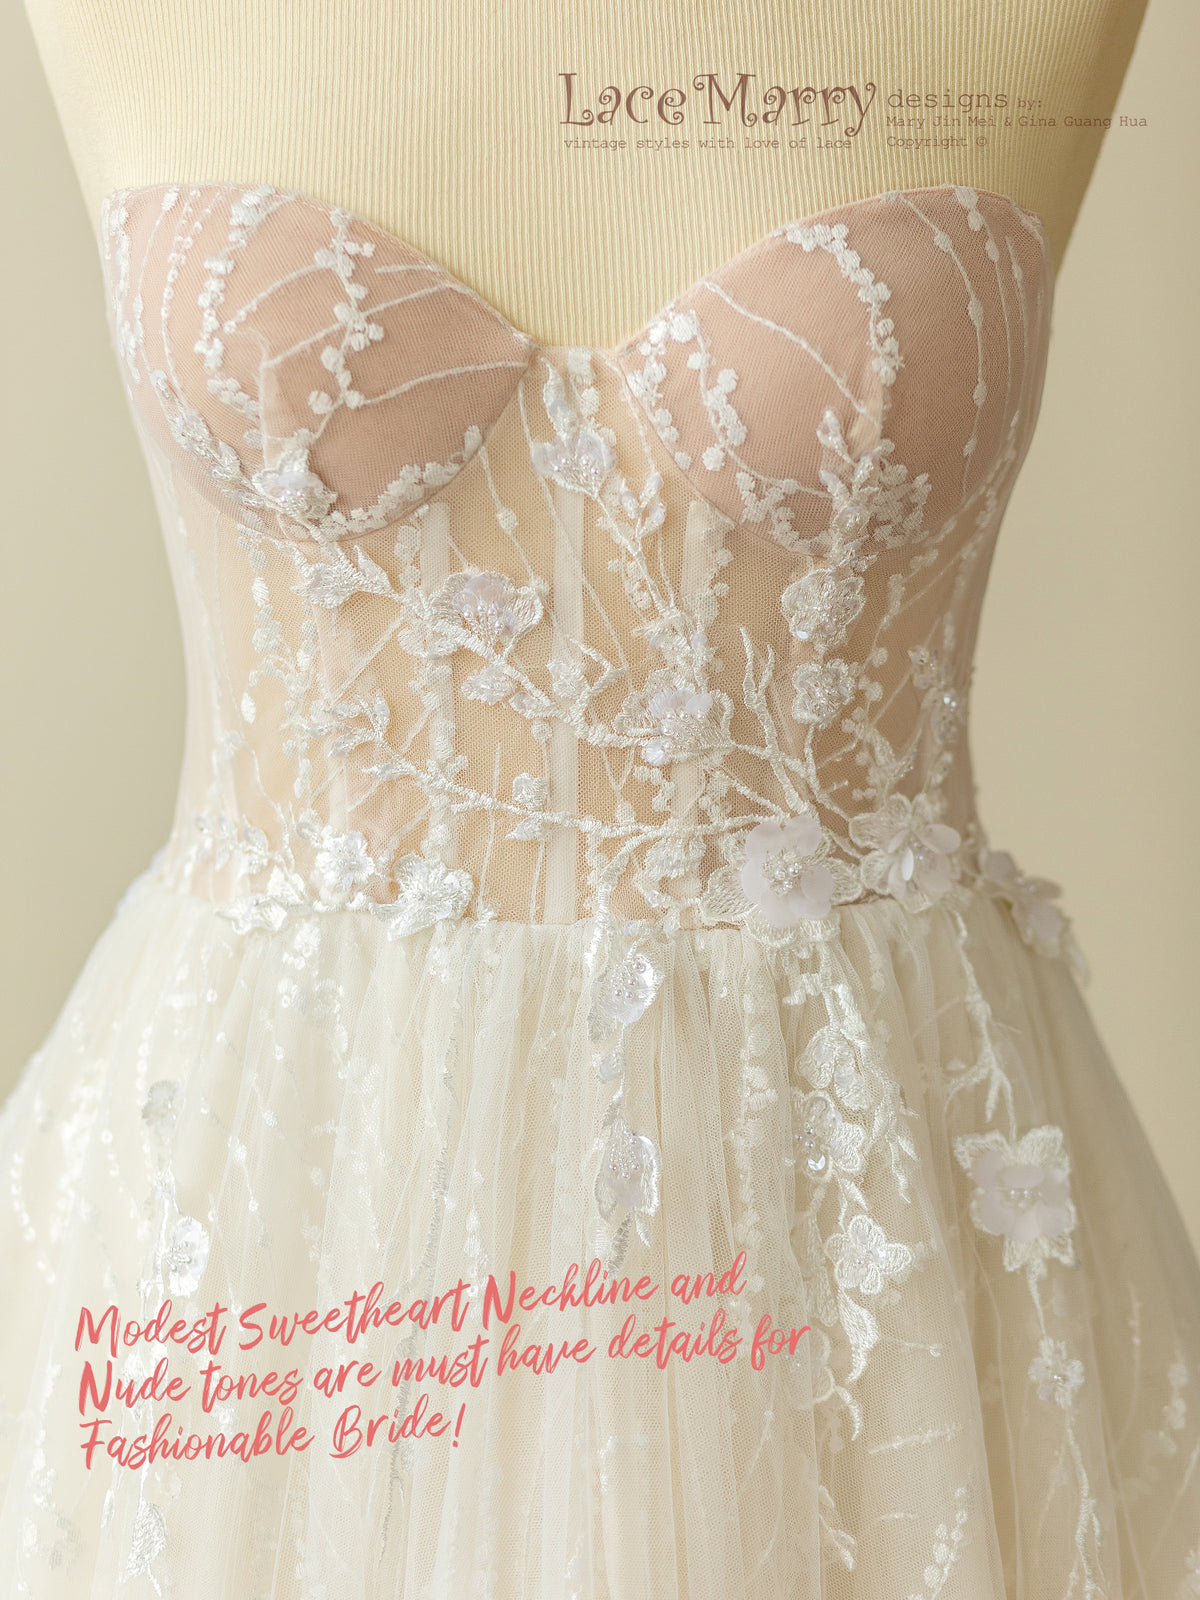 Lace Wedding Dress with Bustier Top